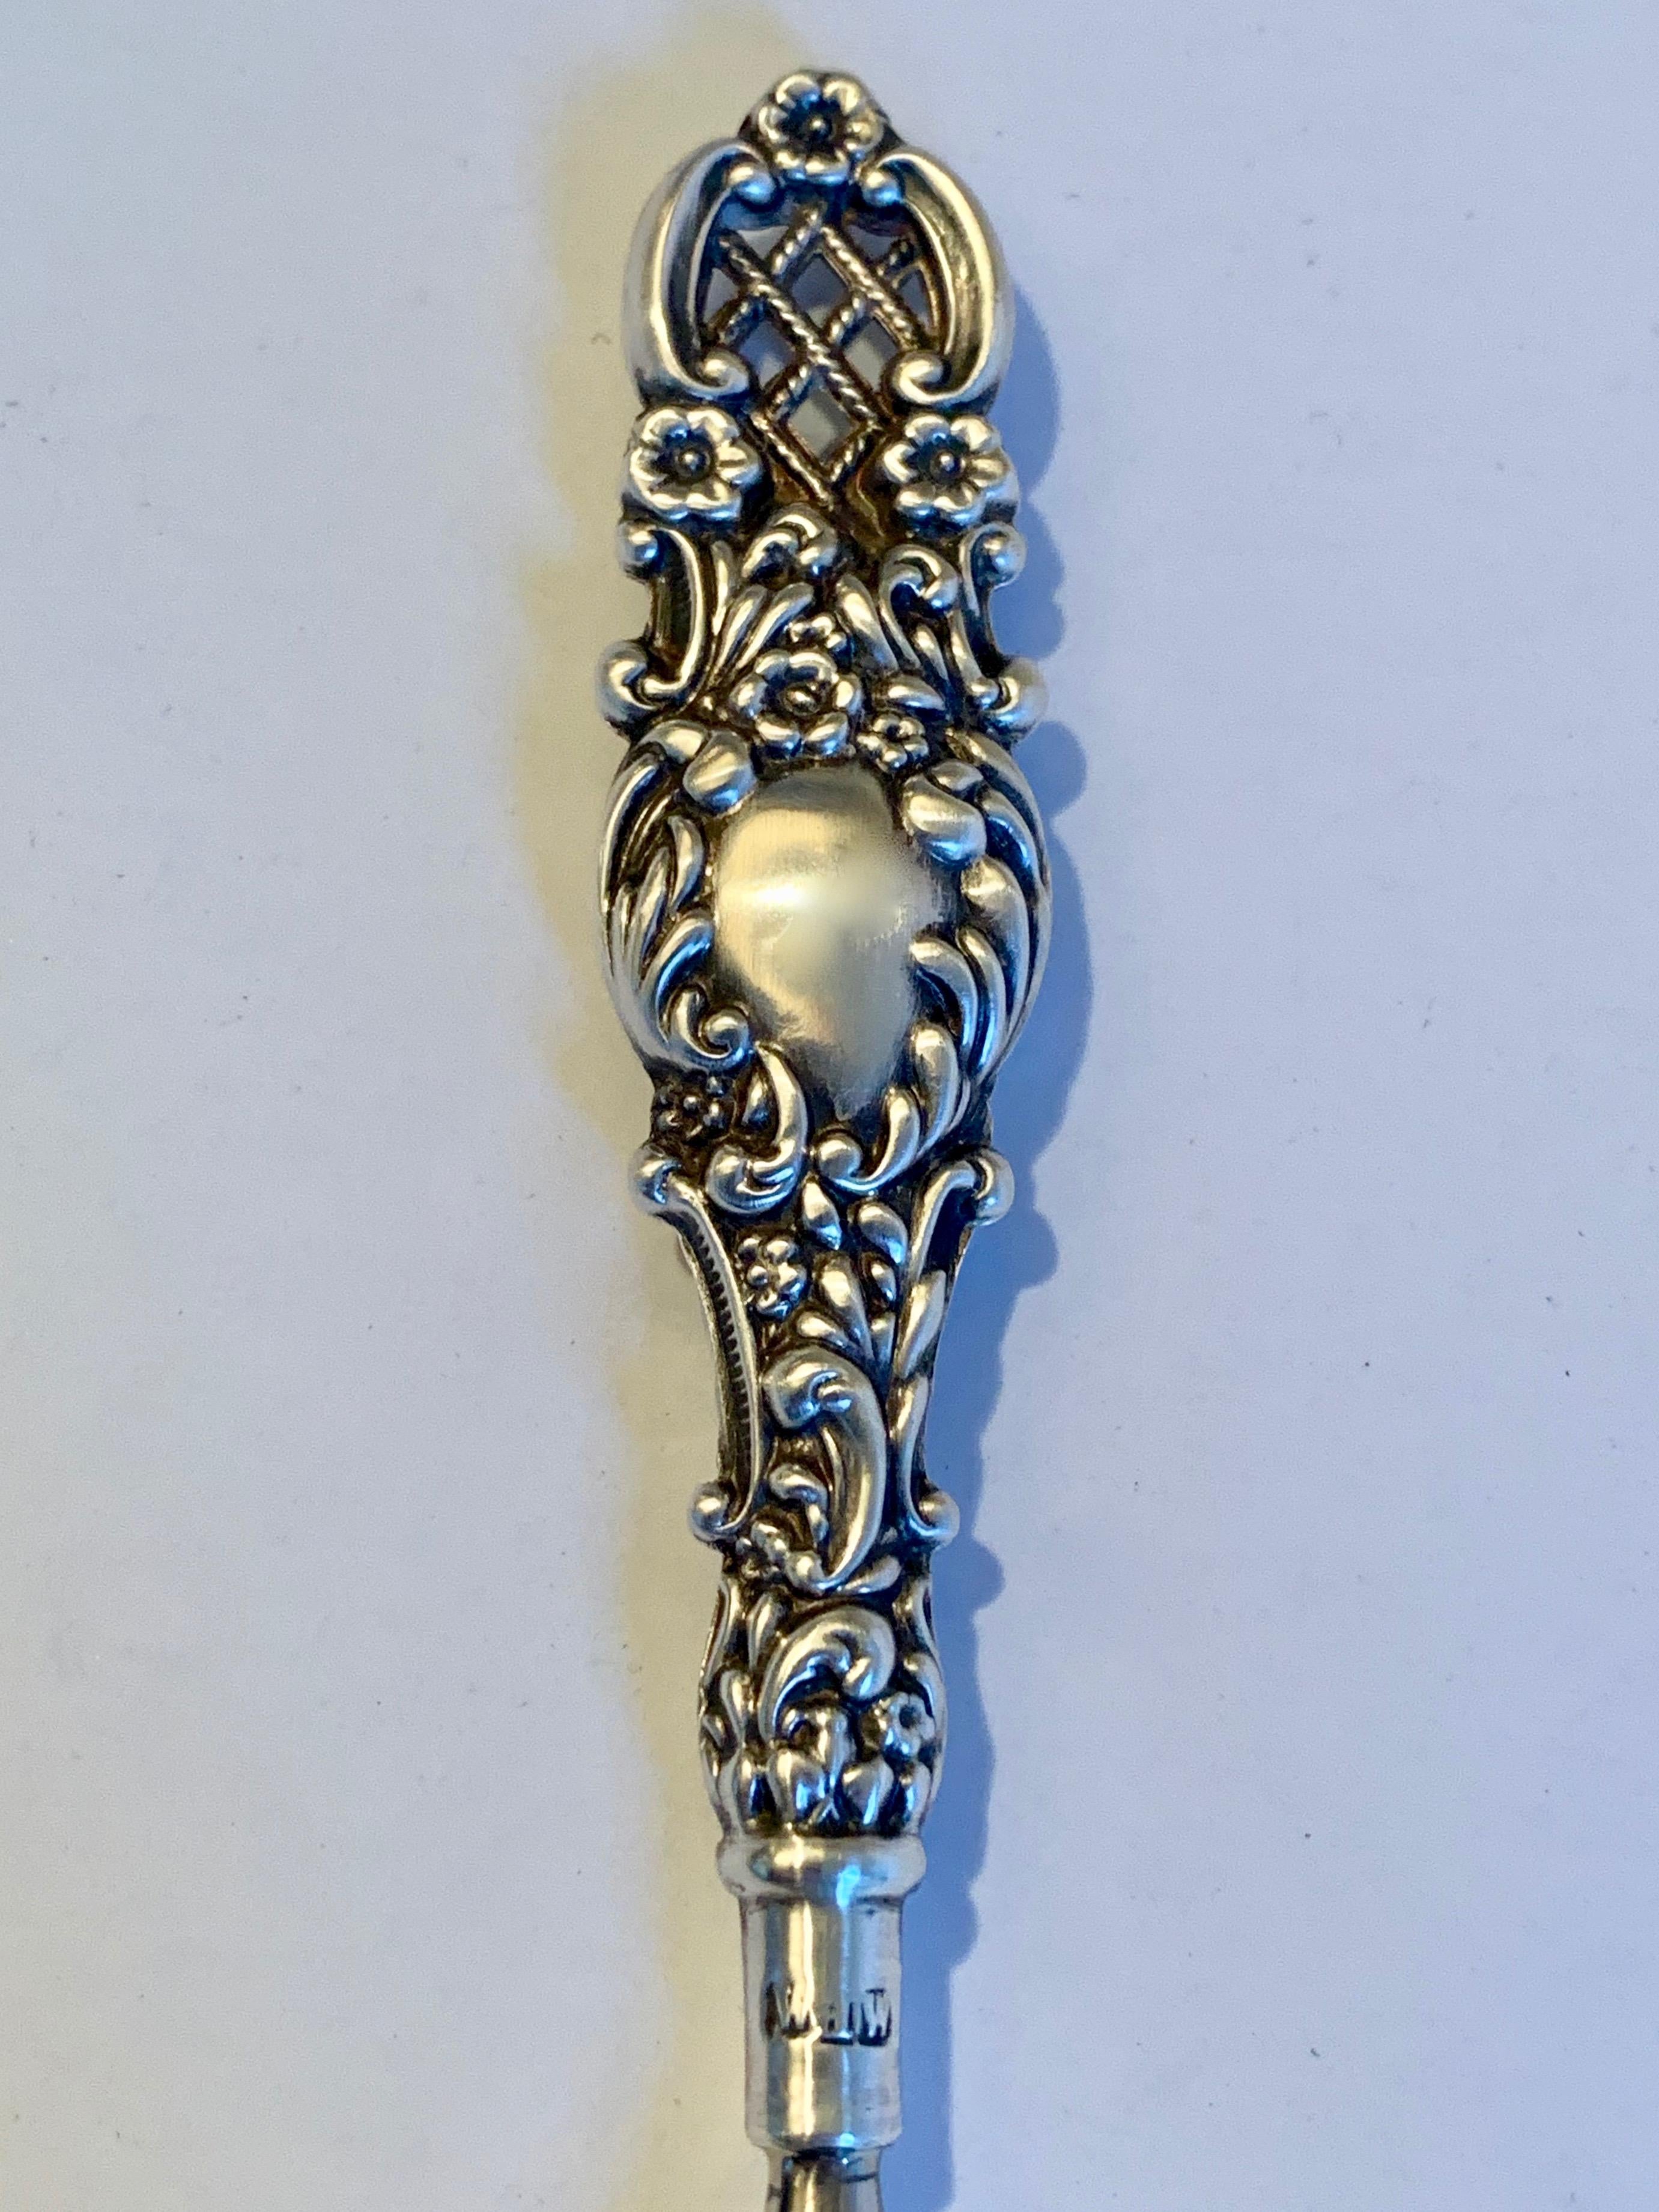 19th century English Repousse with lattice sterling silver shoe horn - perfect for the dressing table or dressing room.... a wonderful practical or decorative piece. In very good condition.